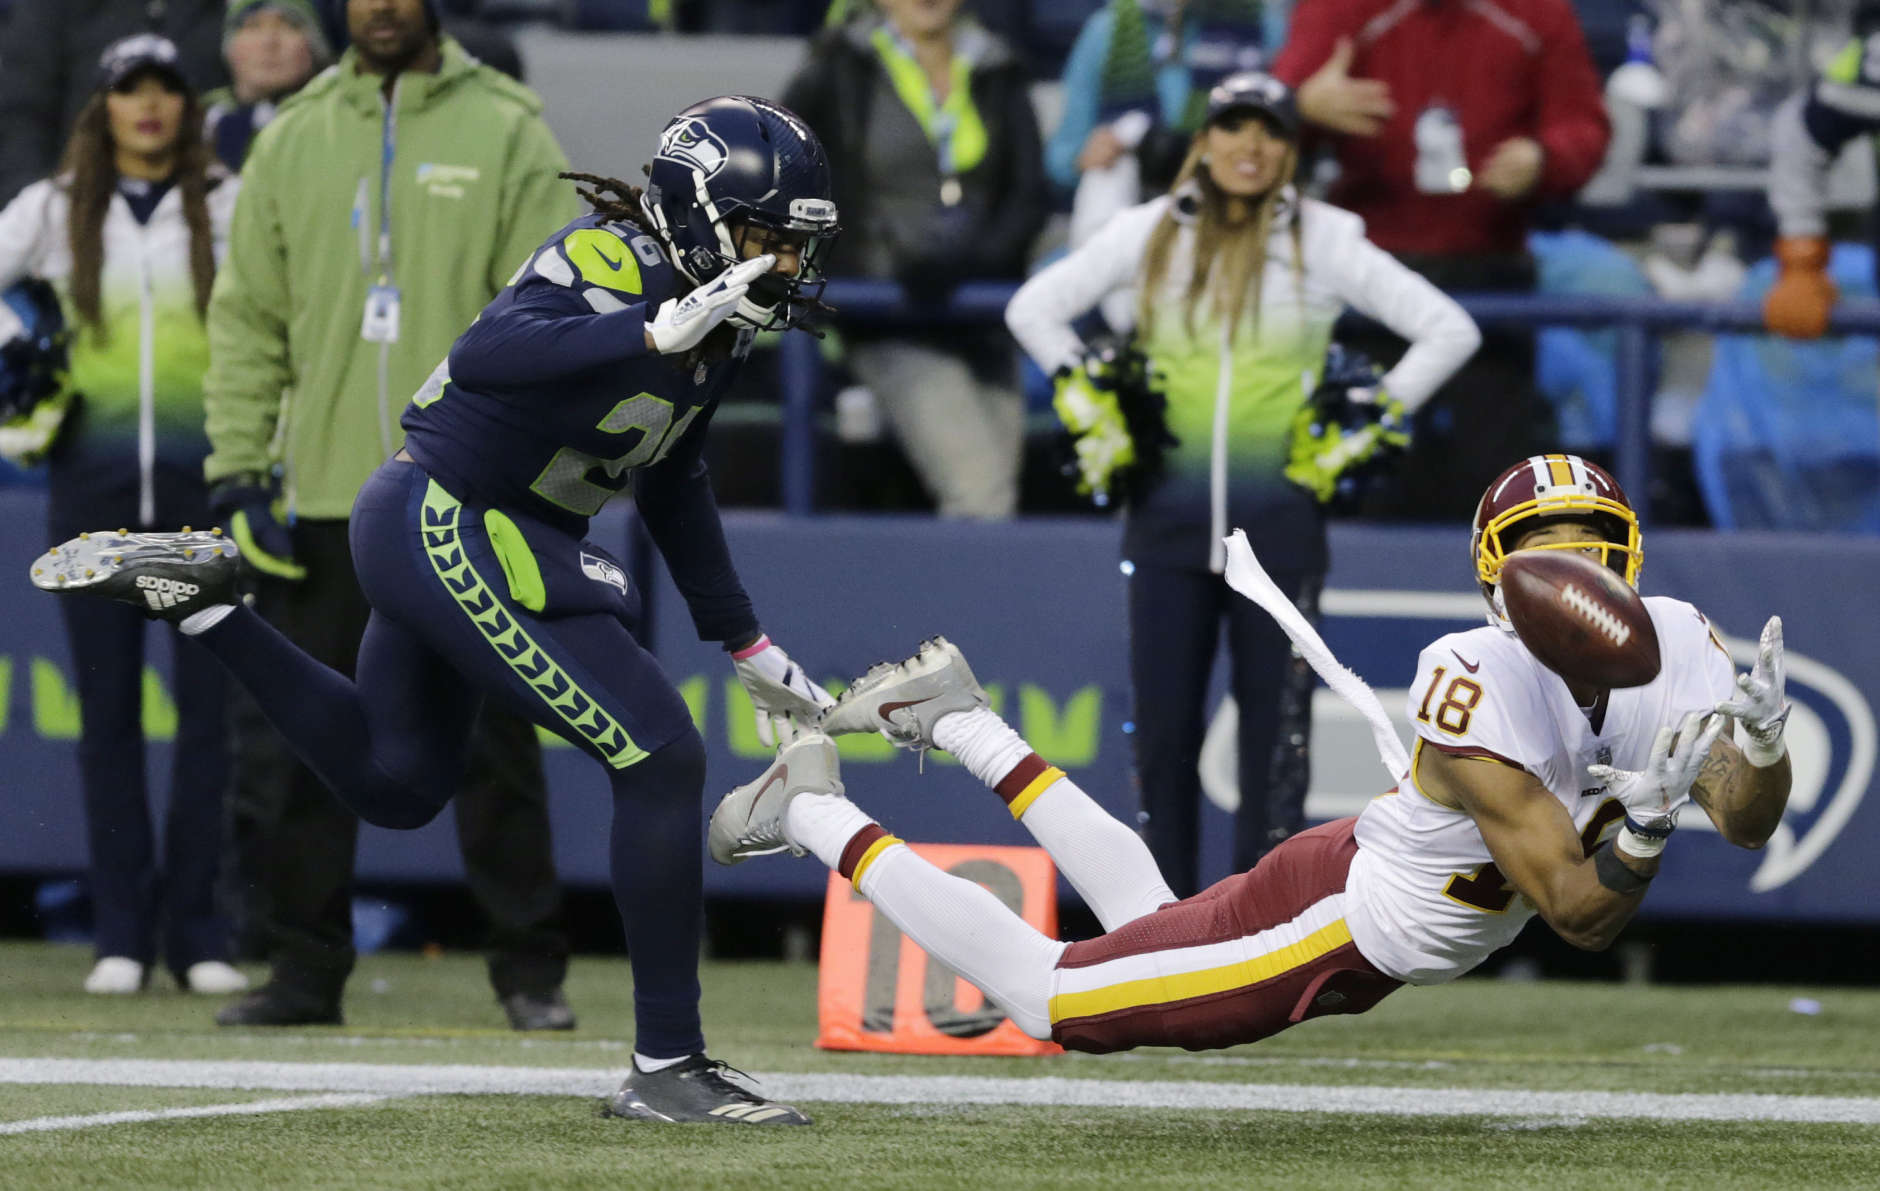 Washington Redskins wide receiver Josh Doctson, right, makes a diving catch ahead of Seattle Seahawks cornerback Shaquill Griffin, left, in the second half of an NFL football game, Sunday, Nov. 5, 2017, in Seattle. The Redskins won 17-14. (AP Photo/Stephen Brashear)